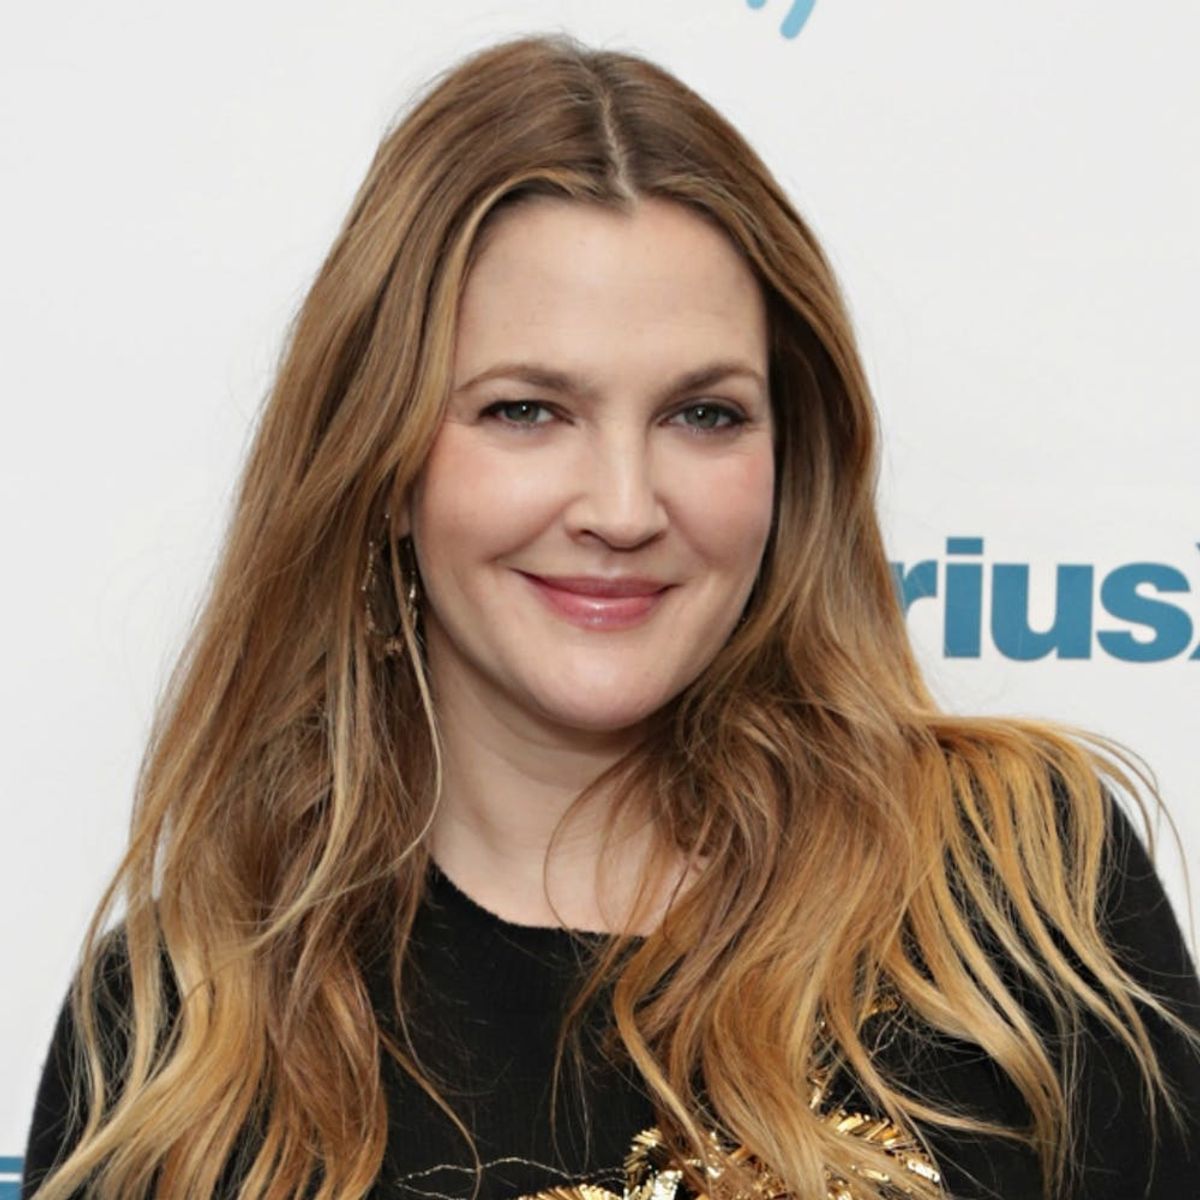 Drew Barrymore Just Revealed the Touching Meaning Behind Her Next Tattoo